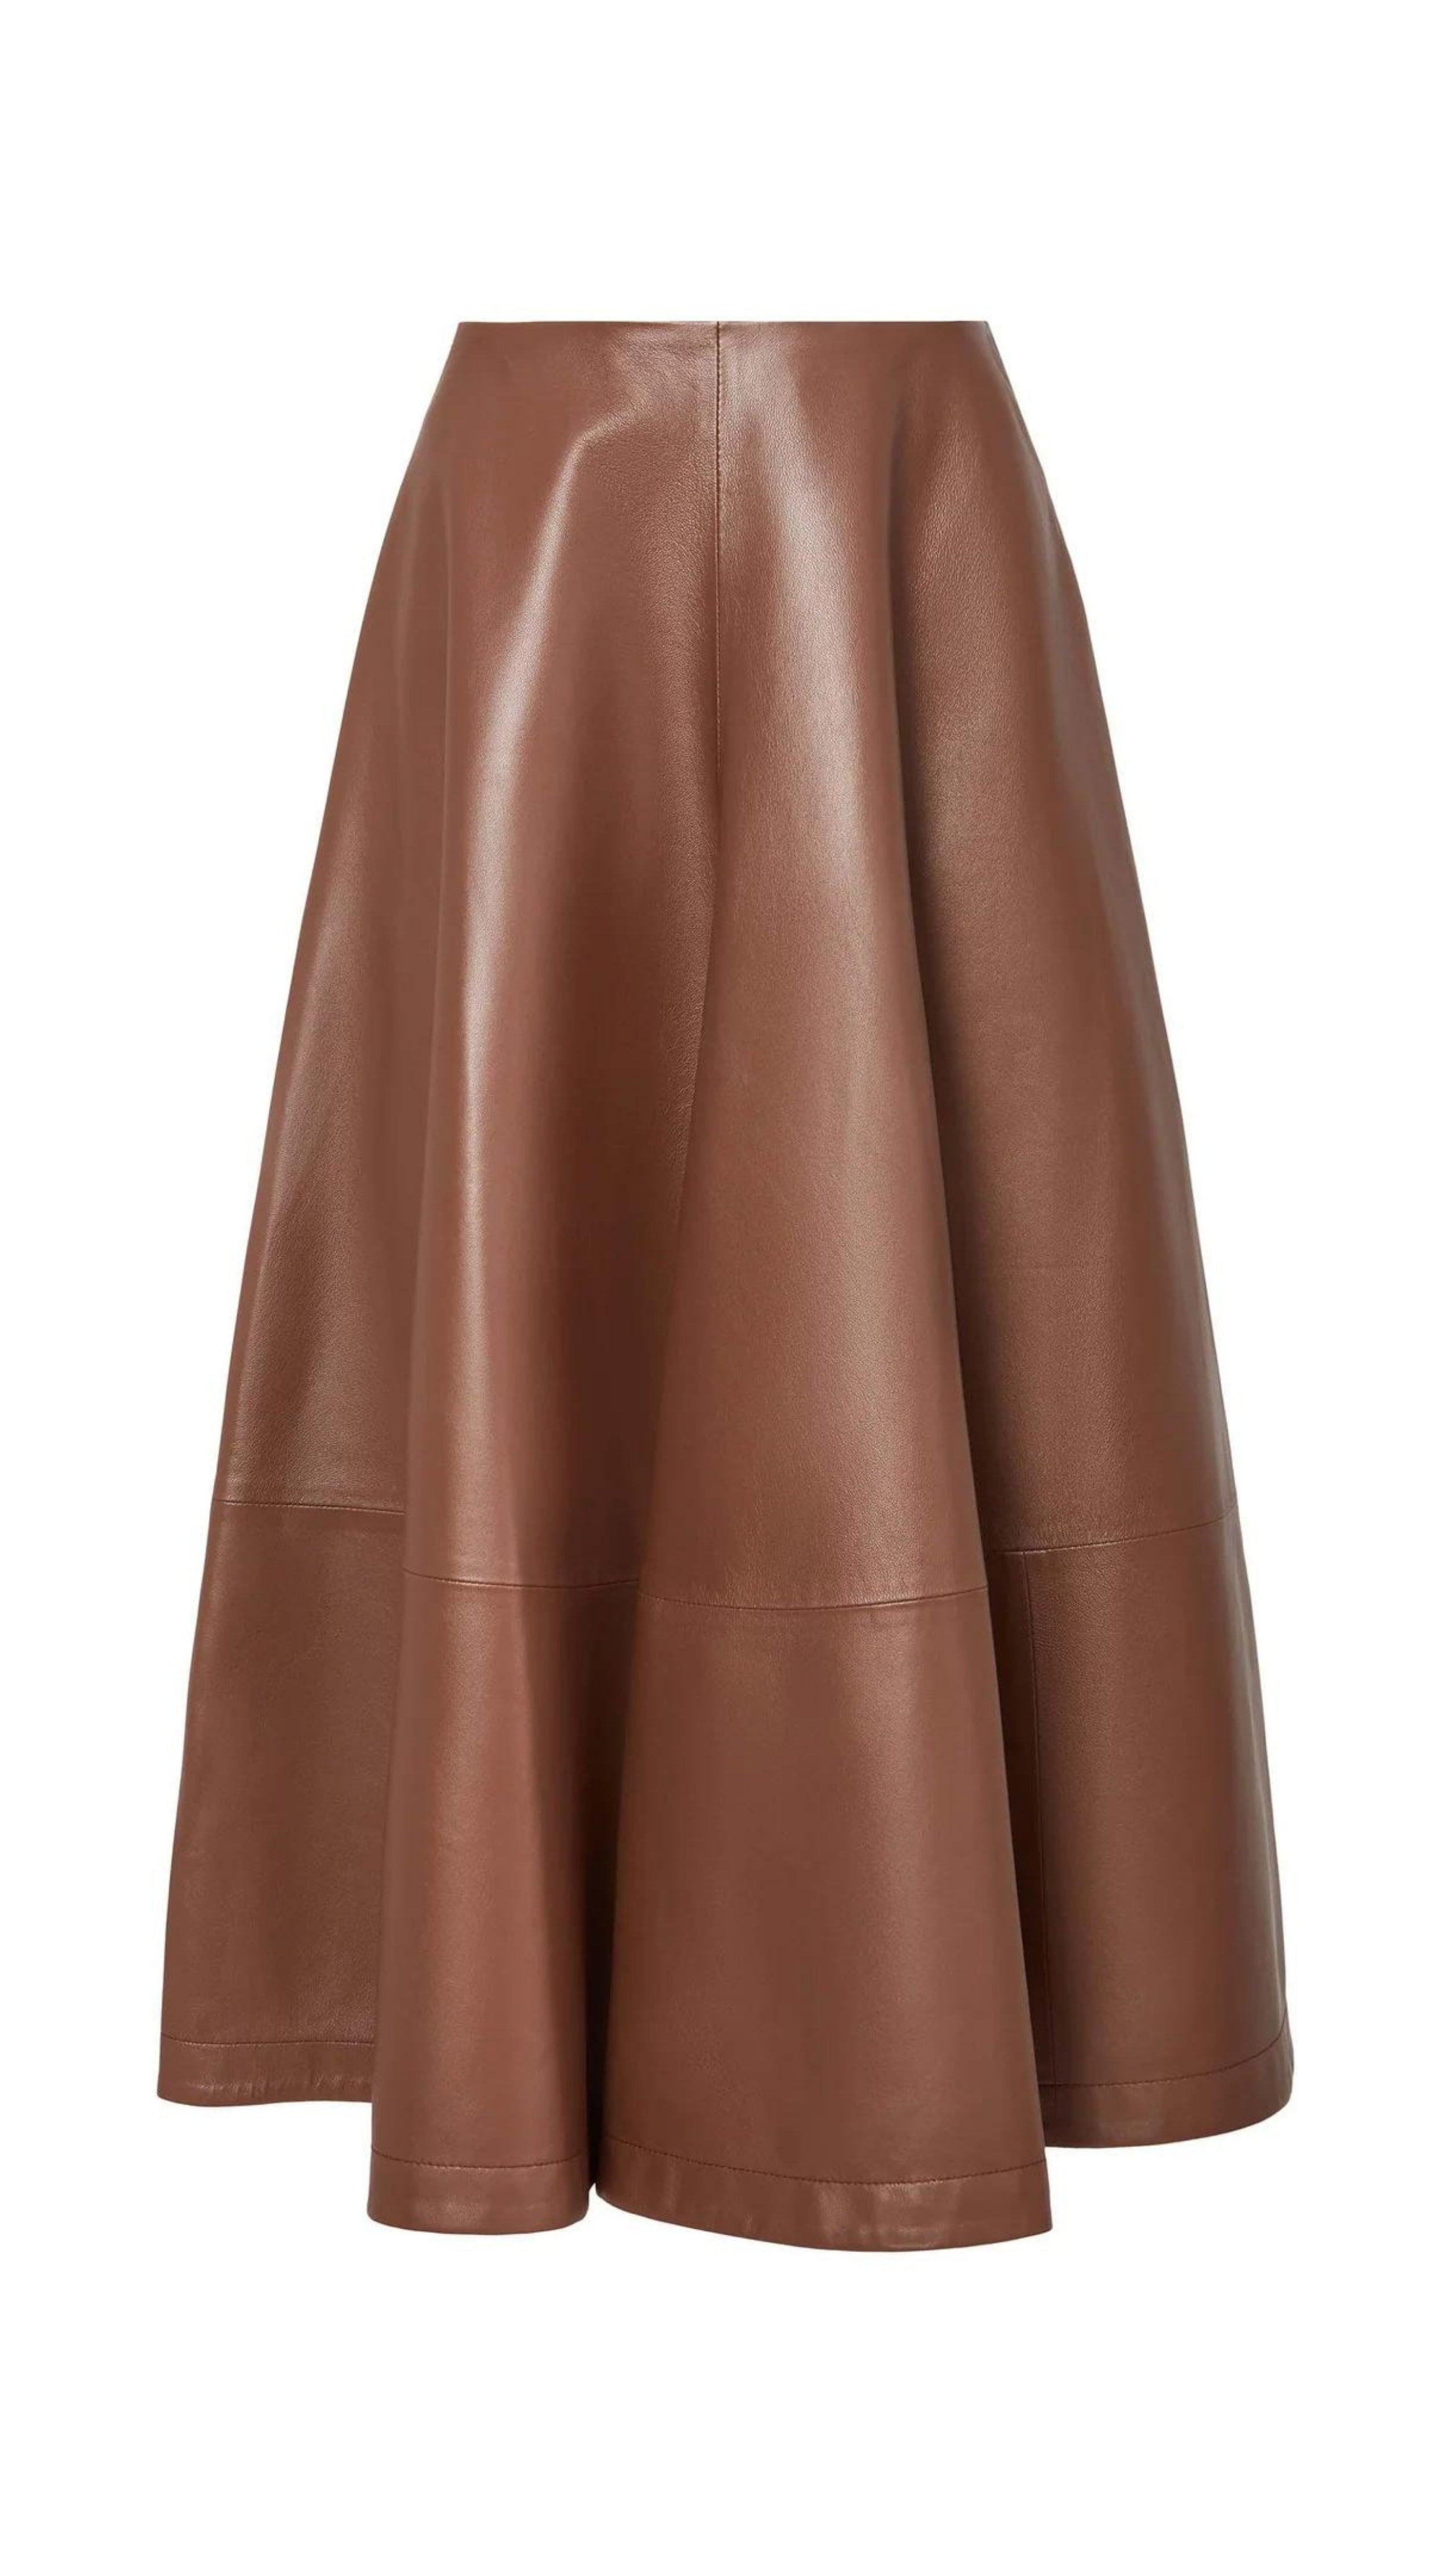 Altuzarra Varda Skirt Made from soft, subtle brown lamb leather, it has an A-line skirt. Midi-length SS24 runway piece. The skirt hem falls to just below the knee. Product photo from the front.